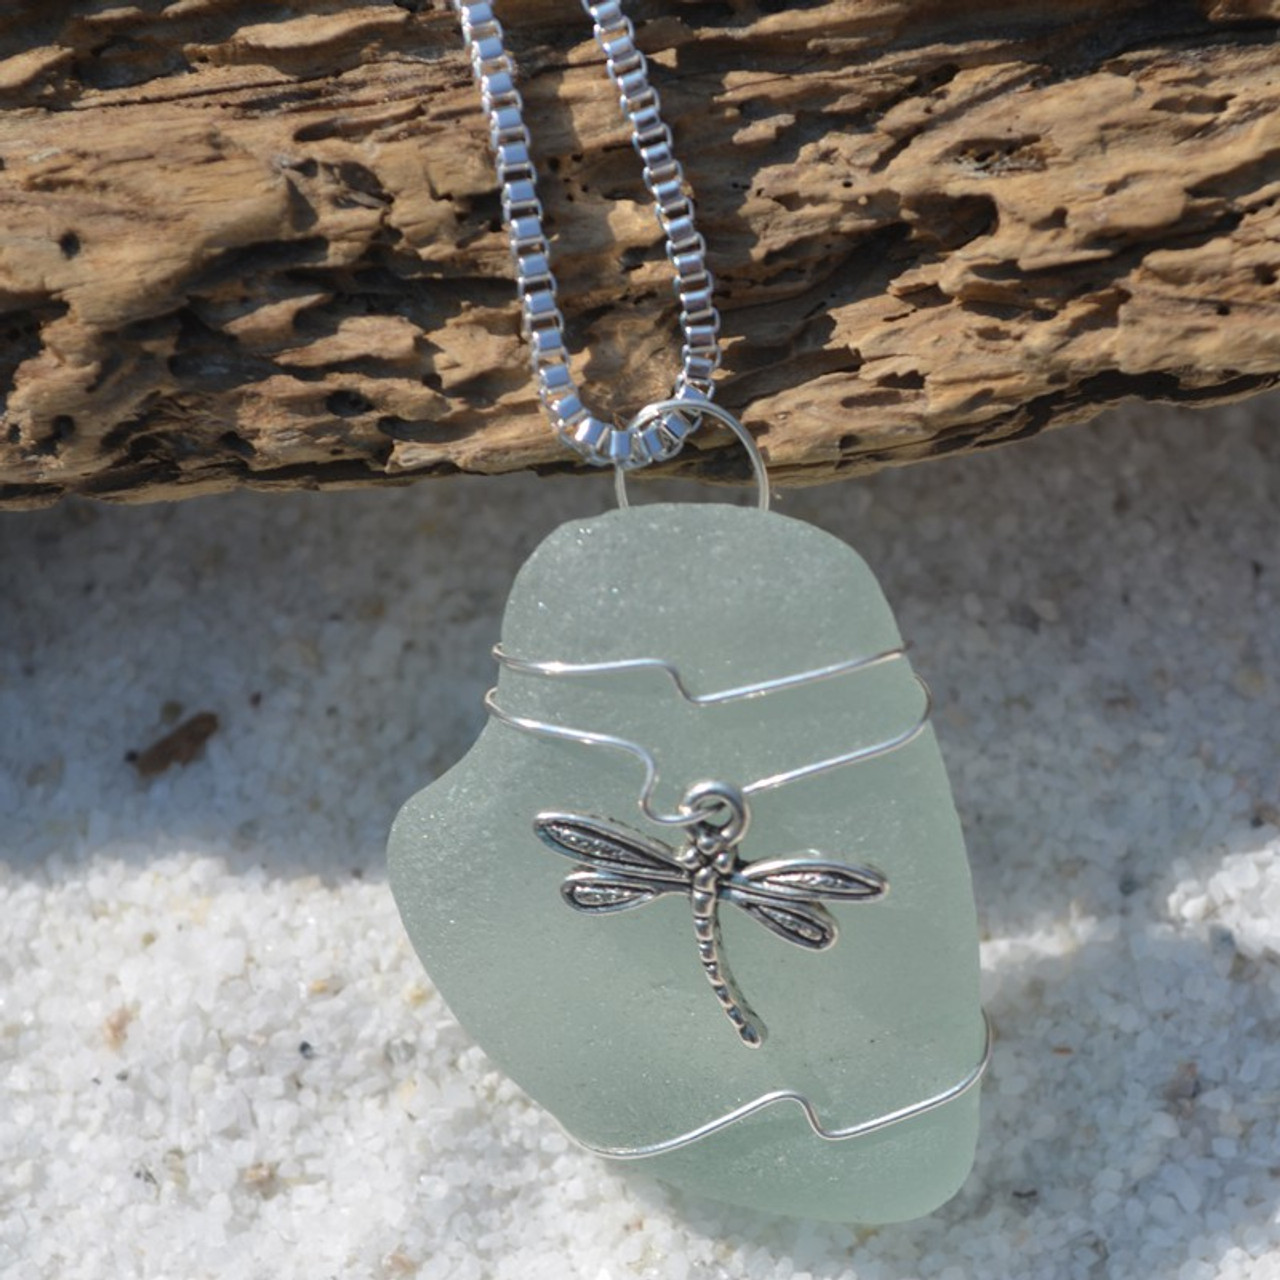 Silver Dragonfly Charm on a Sea Glass Necklace - Choose the Color - Frosted, Green, Brown, or Aqua - Made to Order